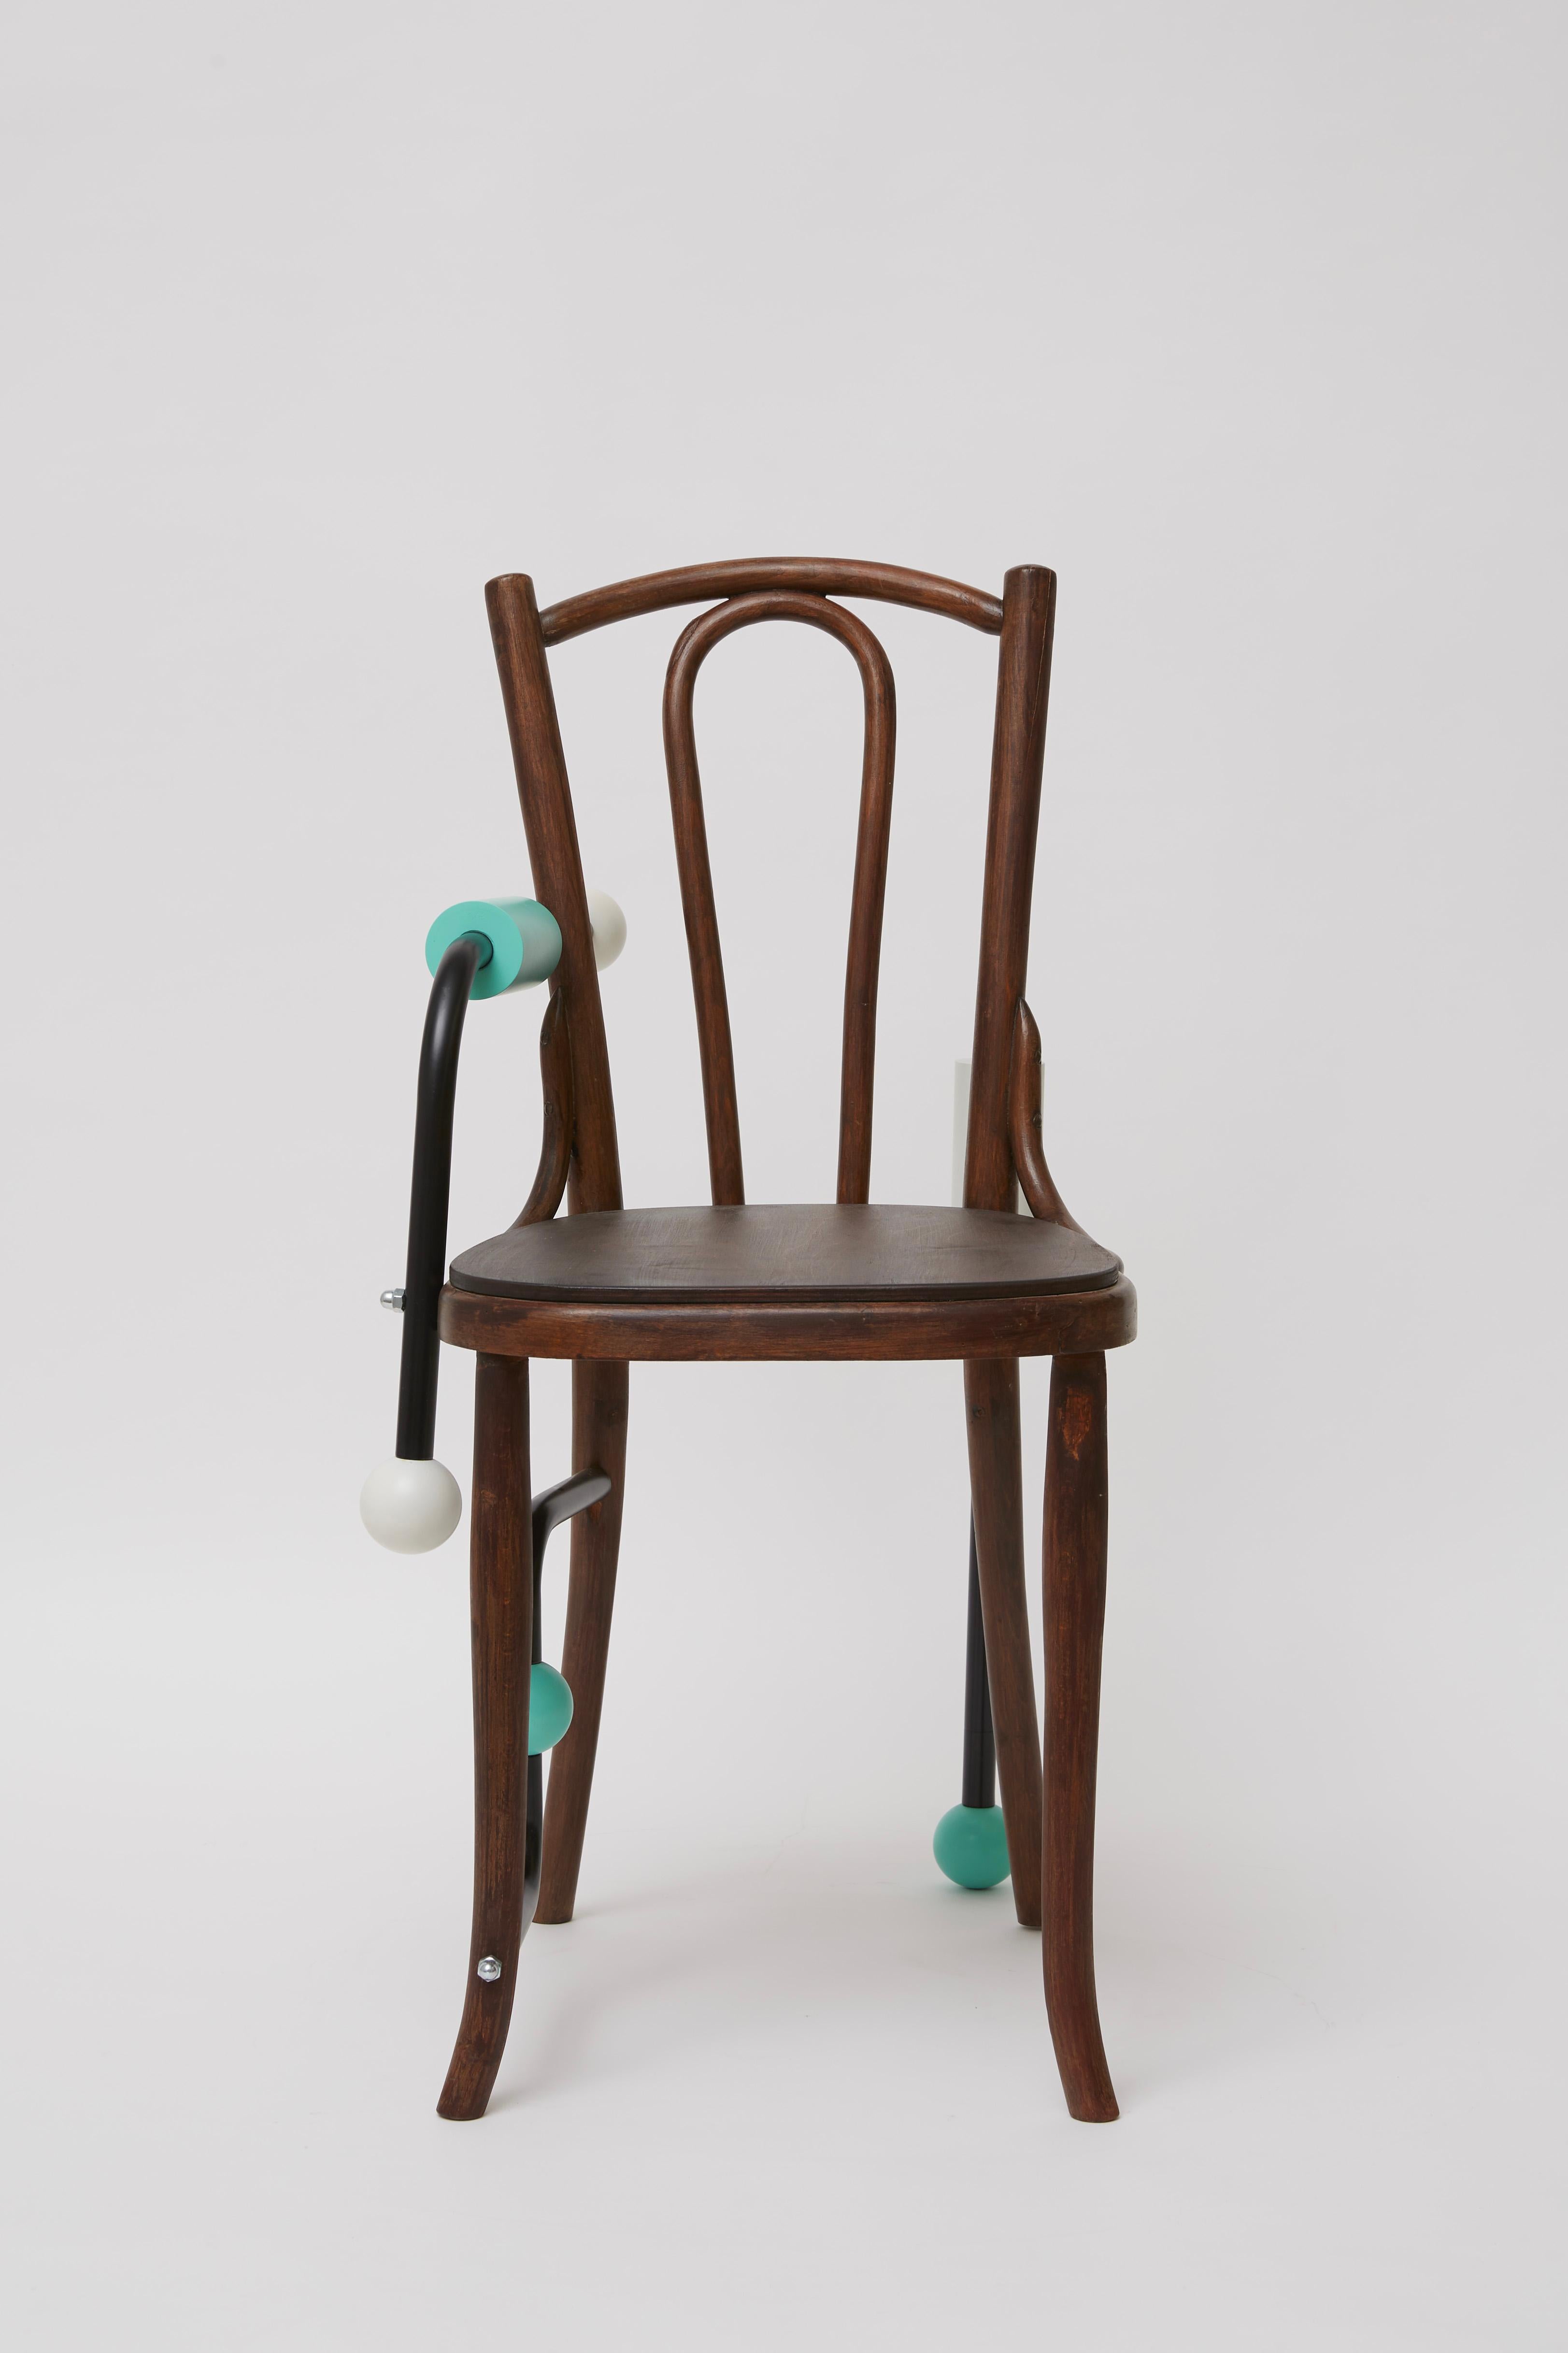 A rustic design from the 19th century enriched with playful cylindrical steel elements and white-and-teal geometric inserts, this chair was inspired by the Morse alphabet. An intense conflict of styles and finishes defines its eclectic character,